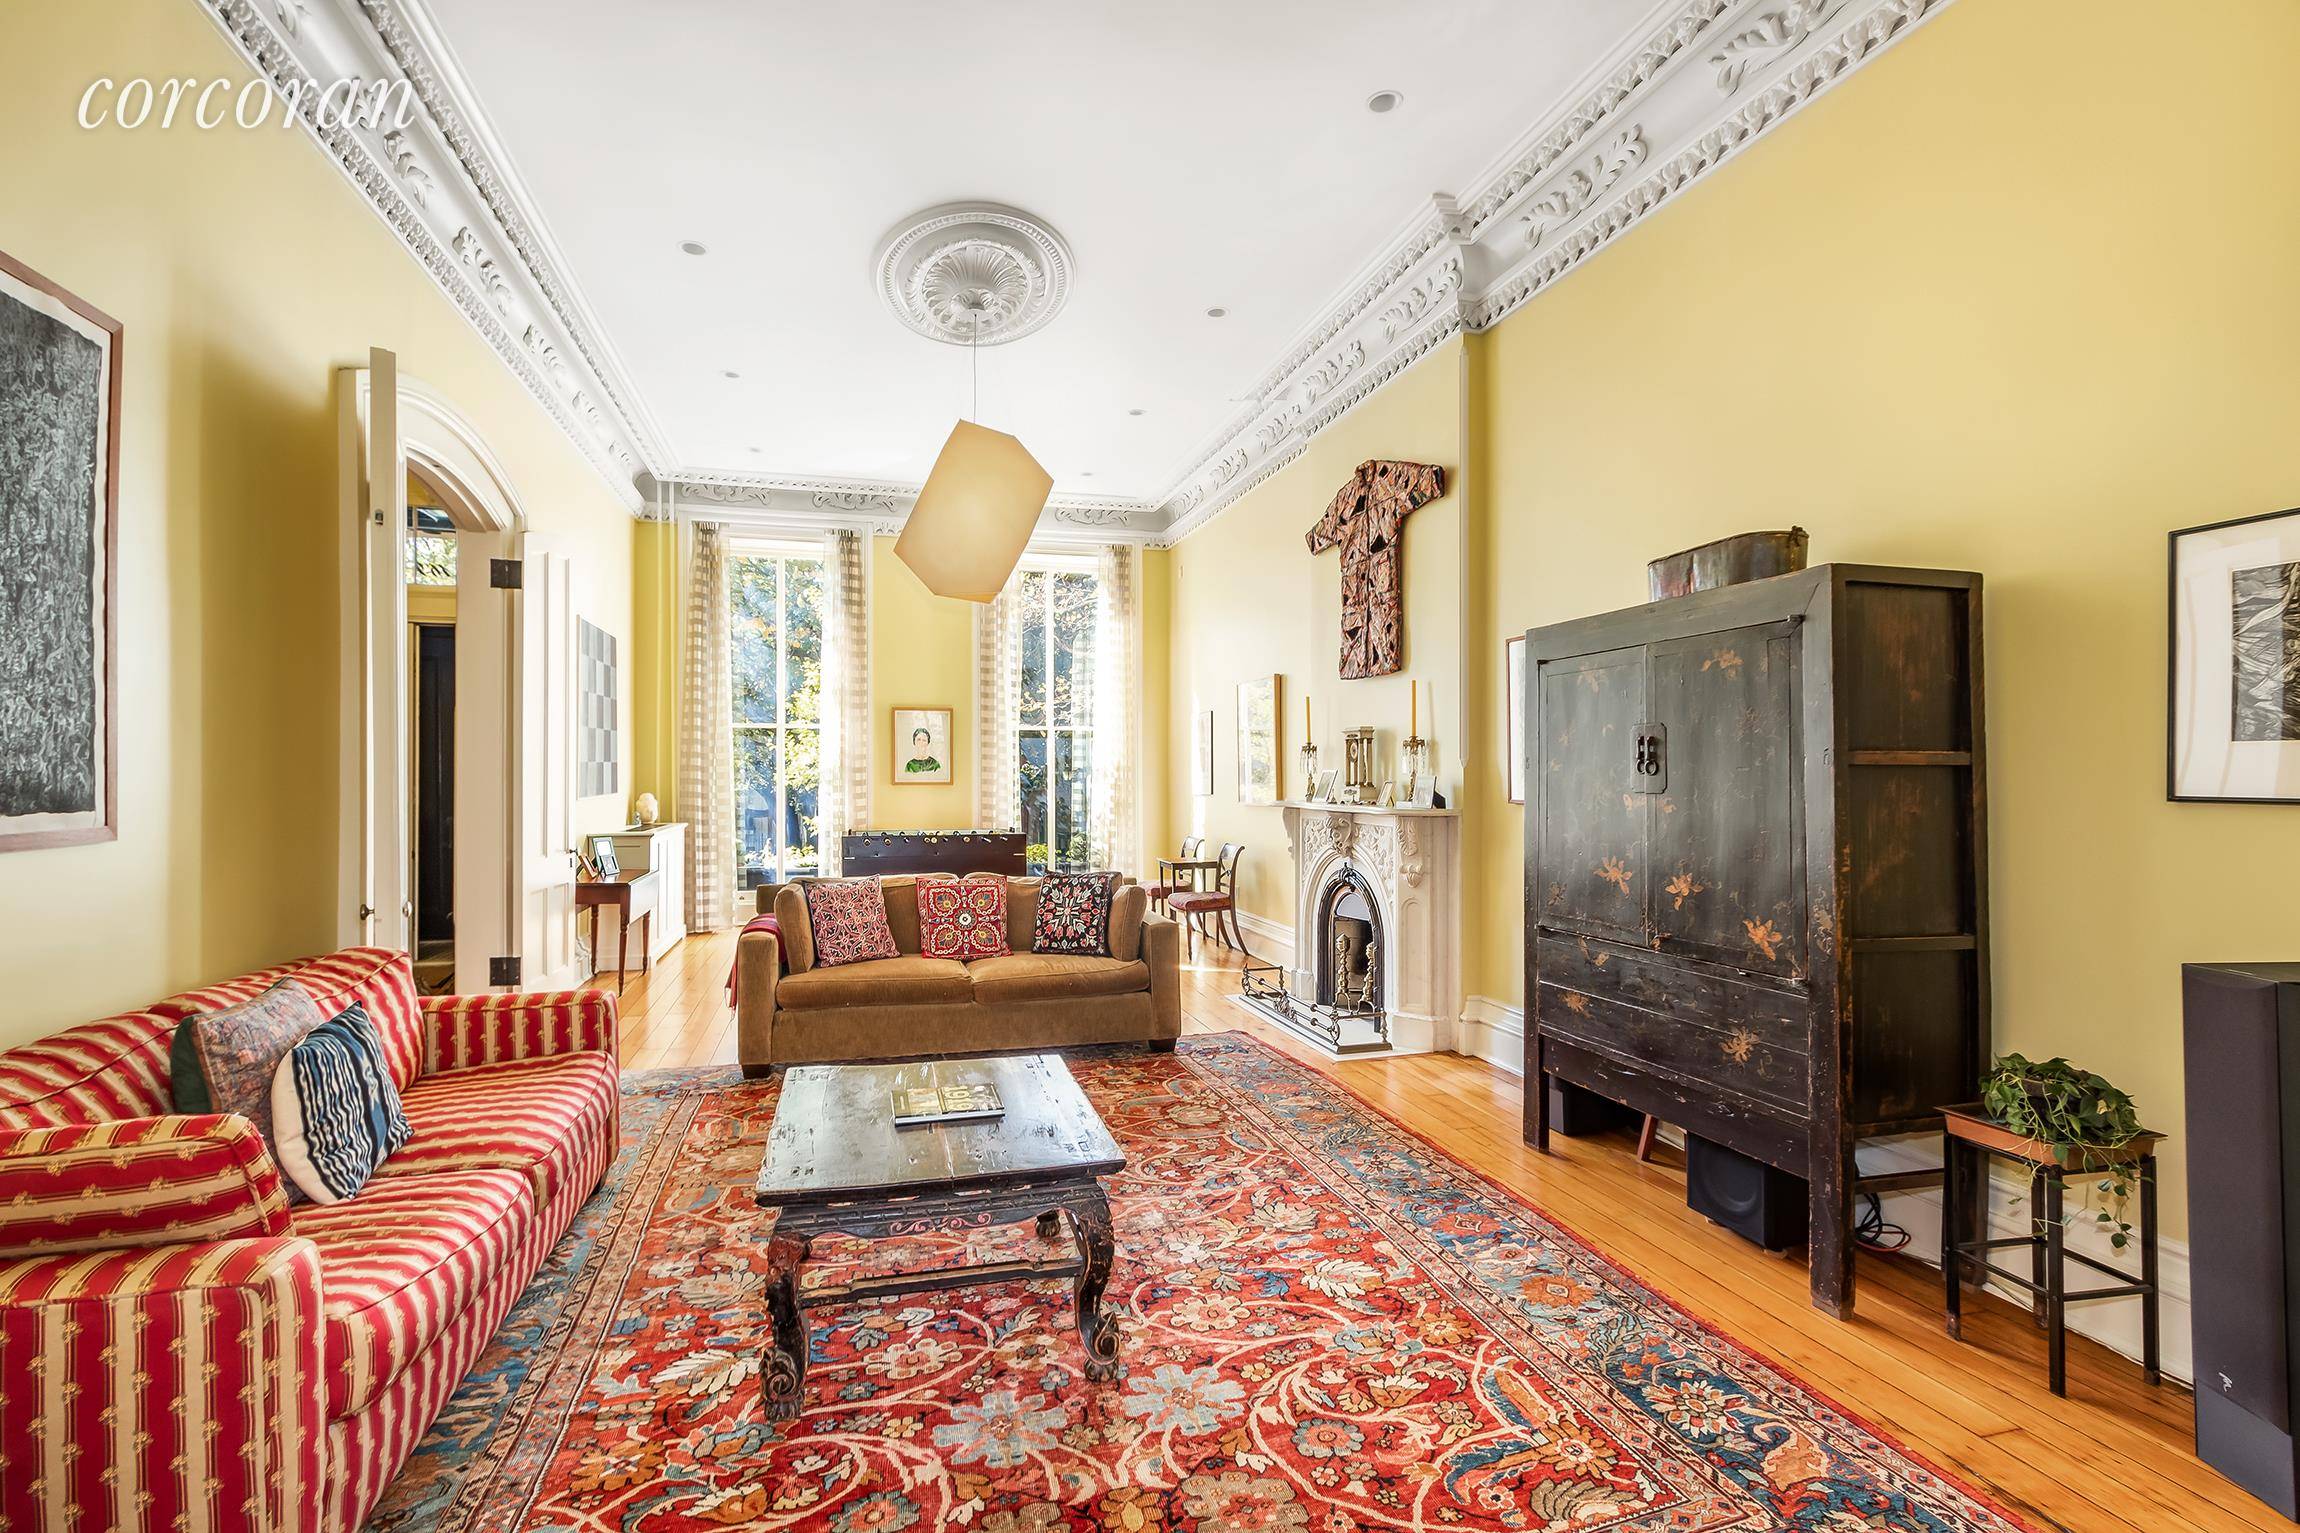 169 Congress Street is a gorgeous 5 story, 25 foot wide brownstone facing Brooklyns Cobble Hill Park and has undergone an extensive renovation and restoration.